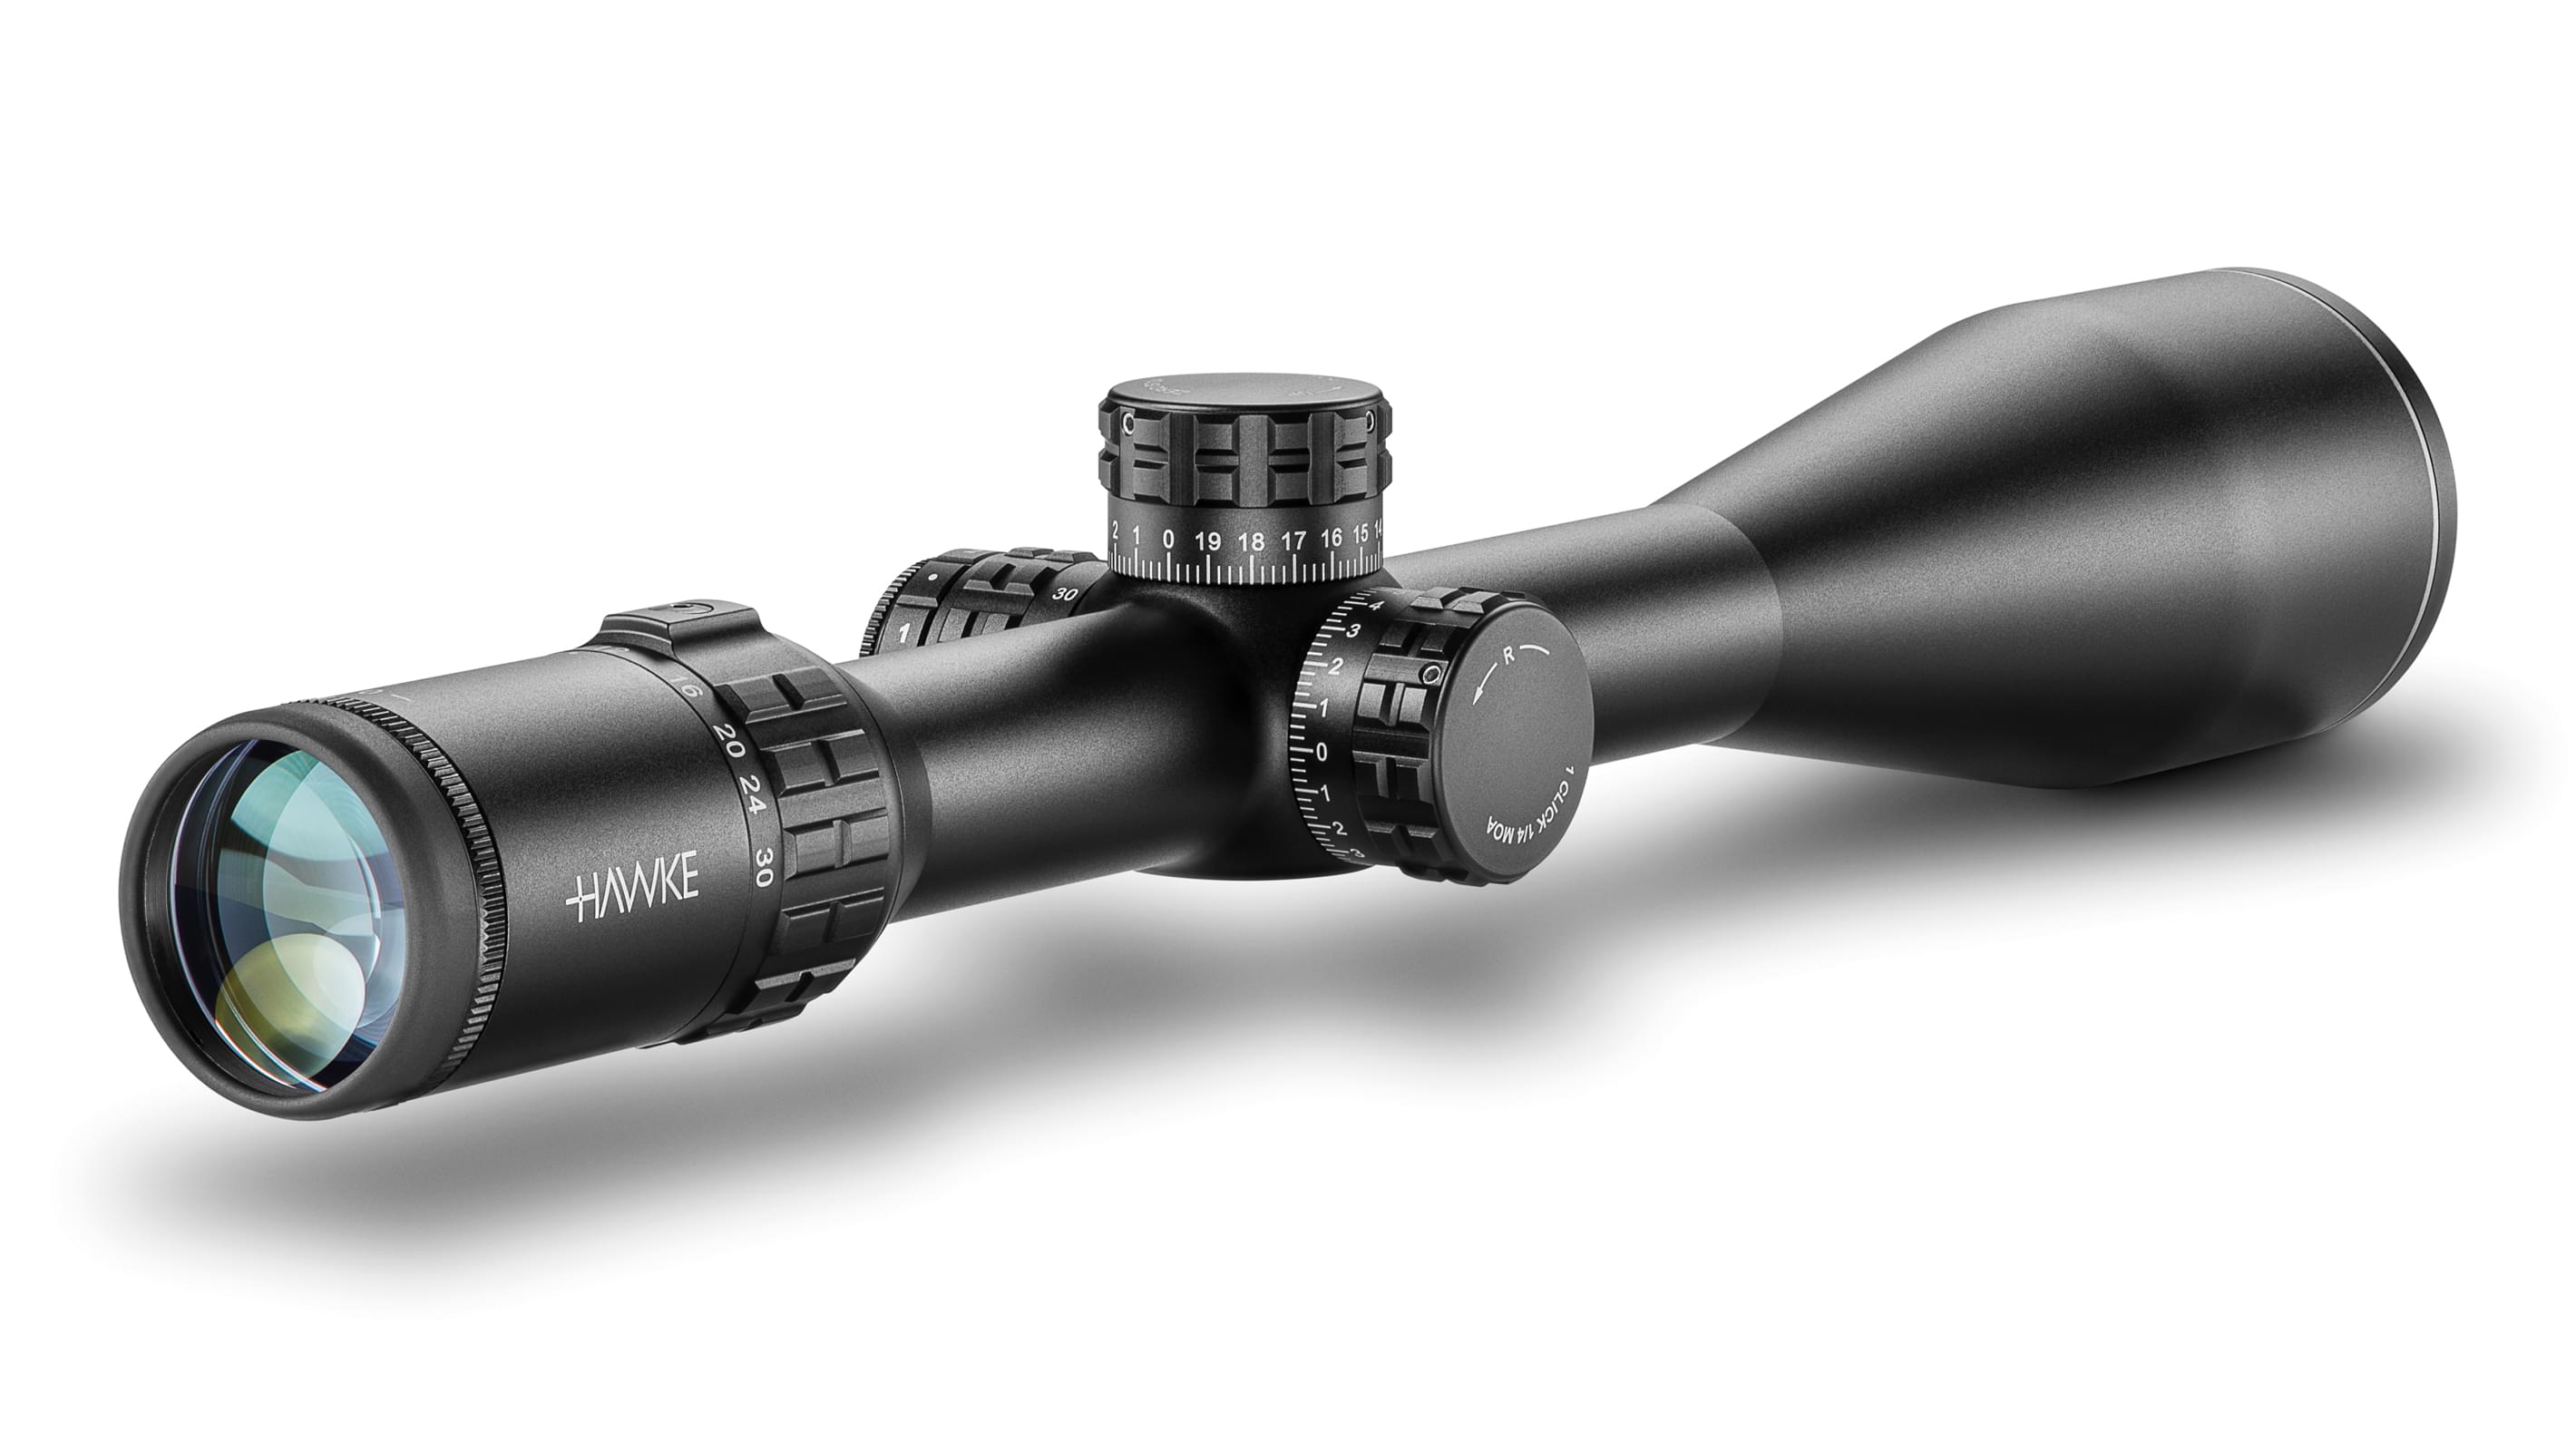 Ocular End View Of The Hawke Frontier 30 SF 5-30x56 LR Dot Rifle Scope